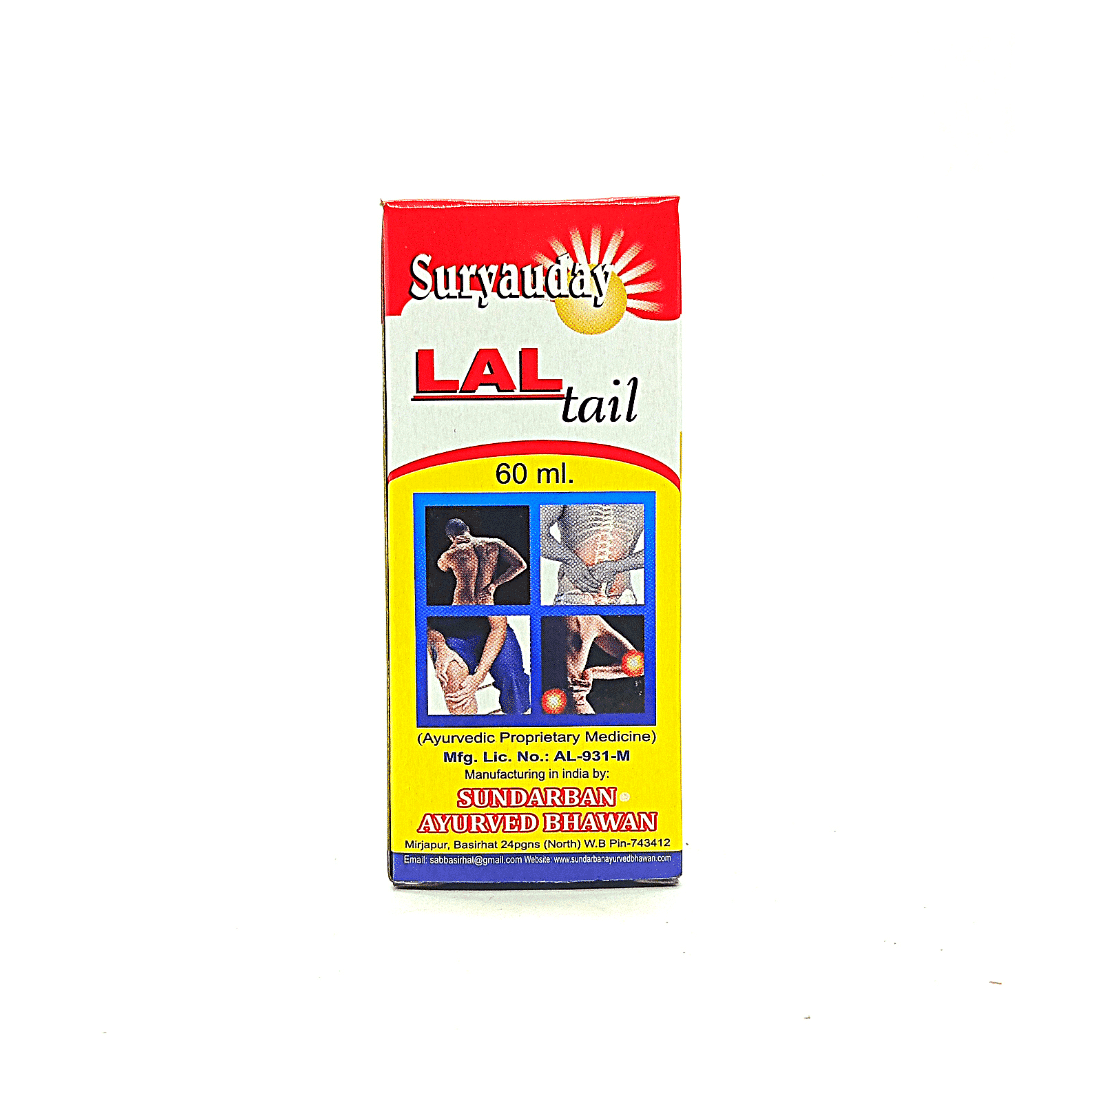 Buy Pain Relief Suryauday Lal Tail 60 ml For Joint Pain,Arthritis pain,Gout pain, Sprain pain, Pain from injury or trauma.